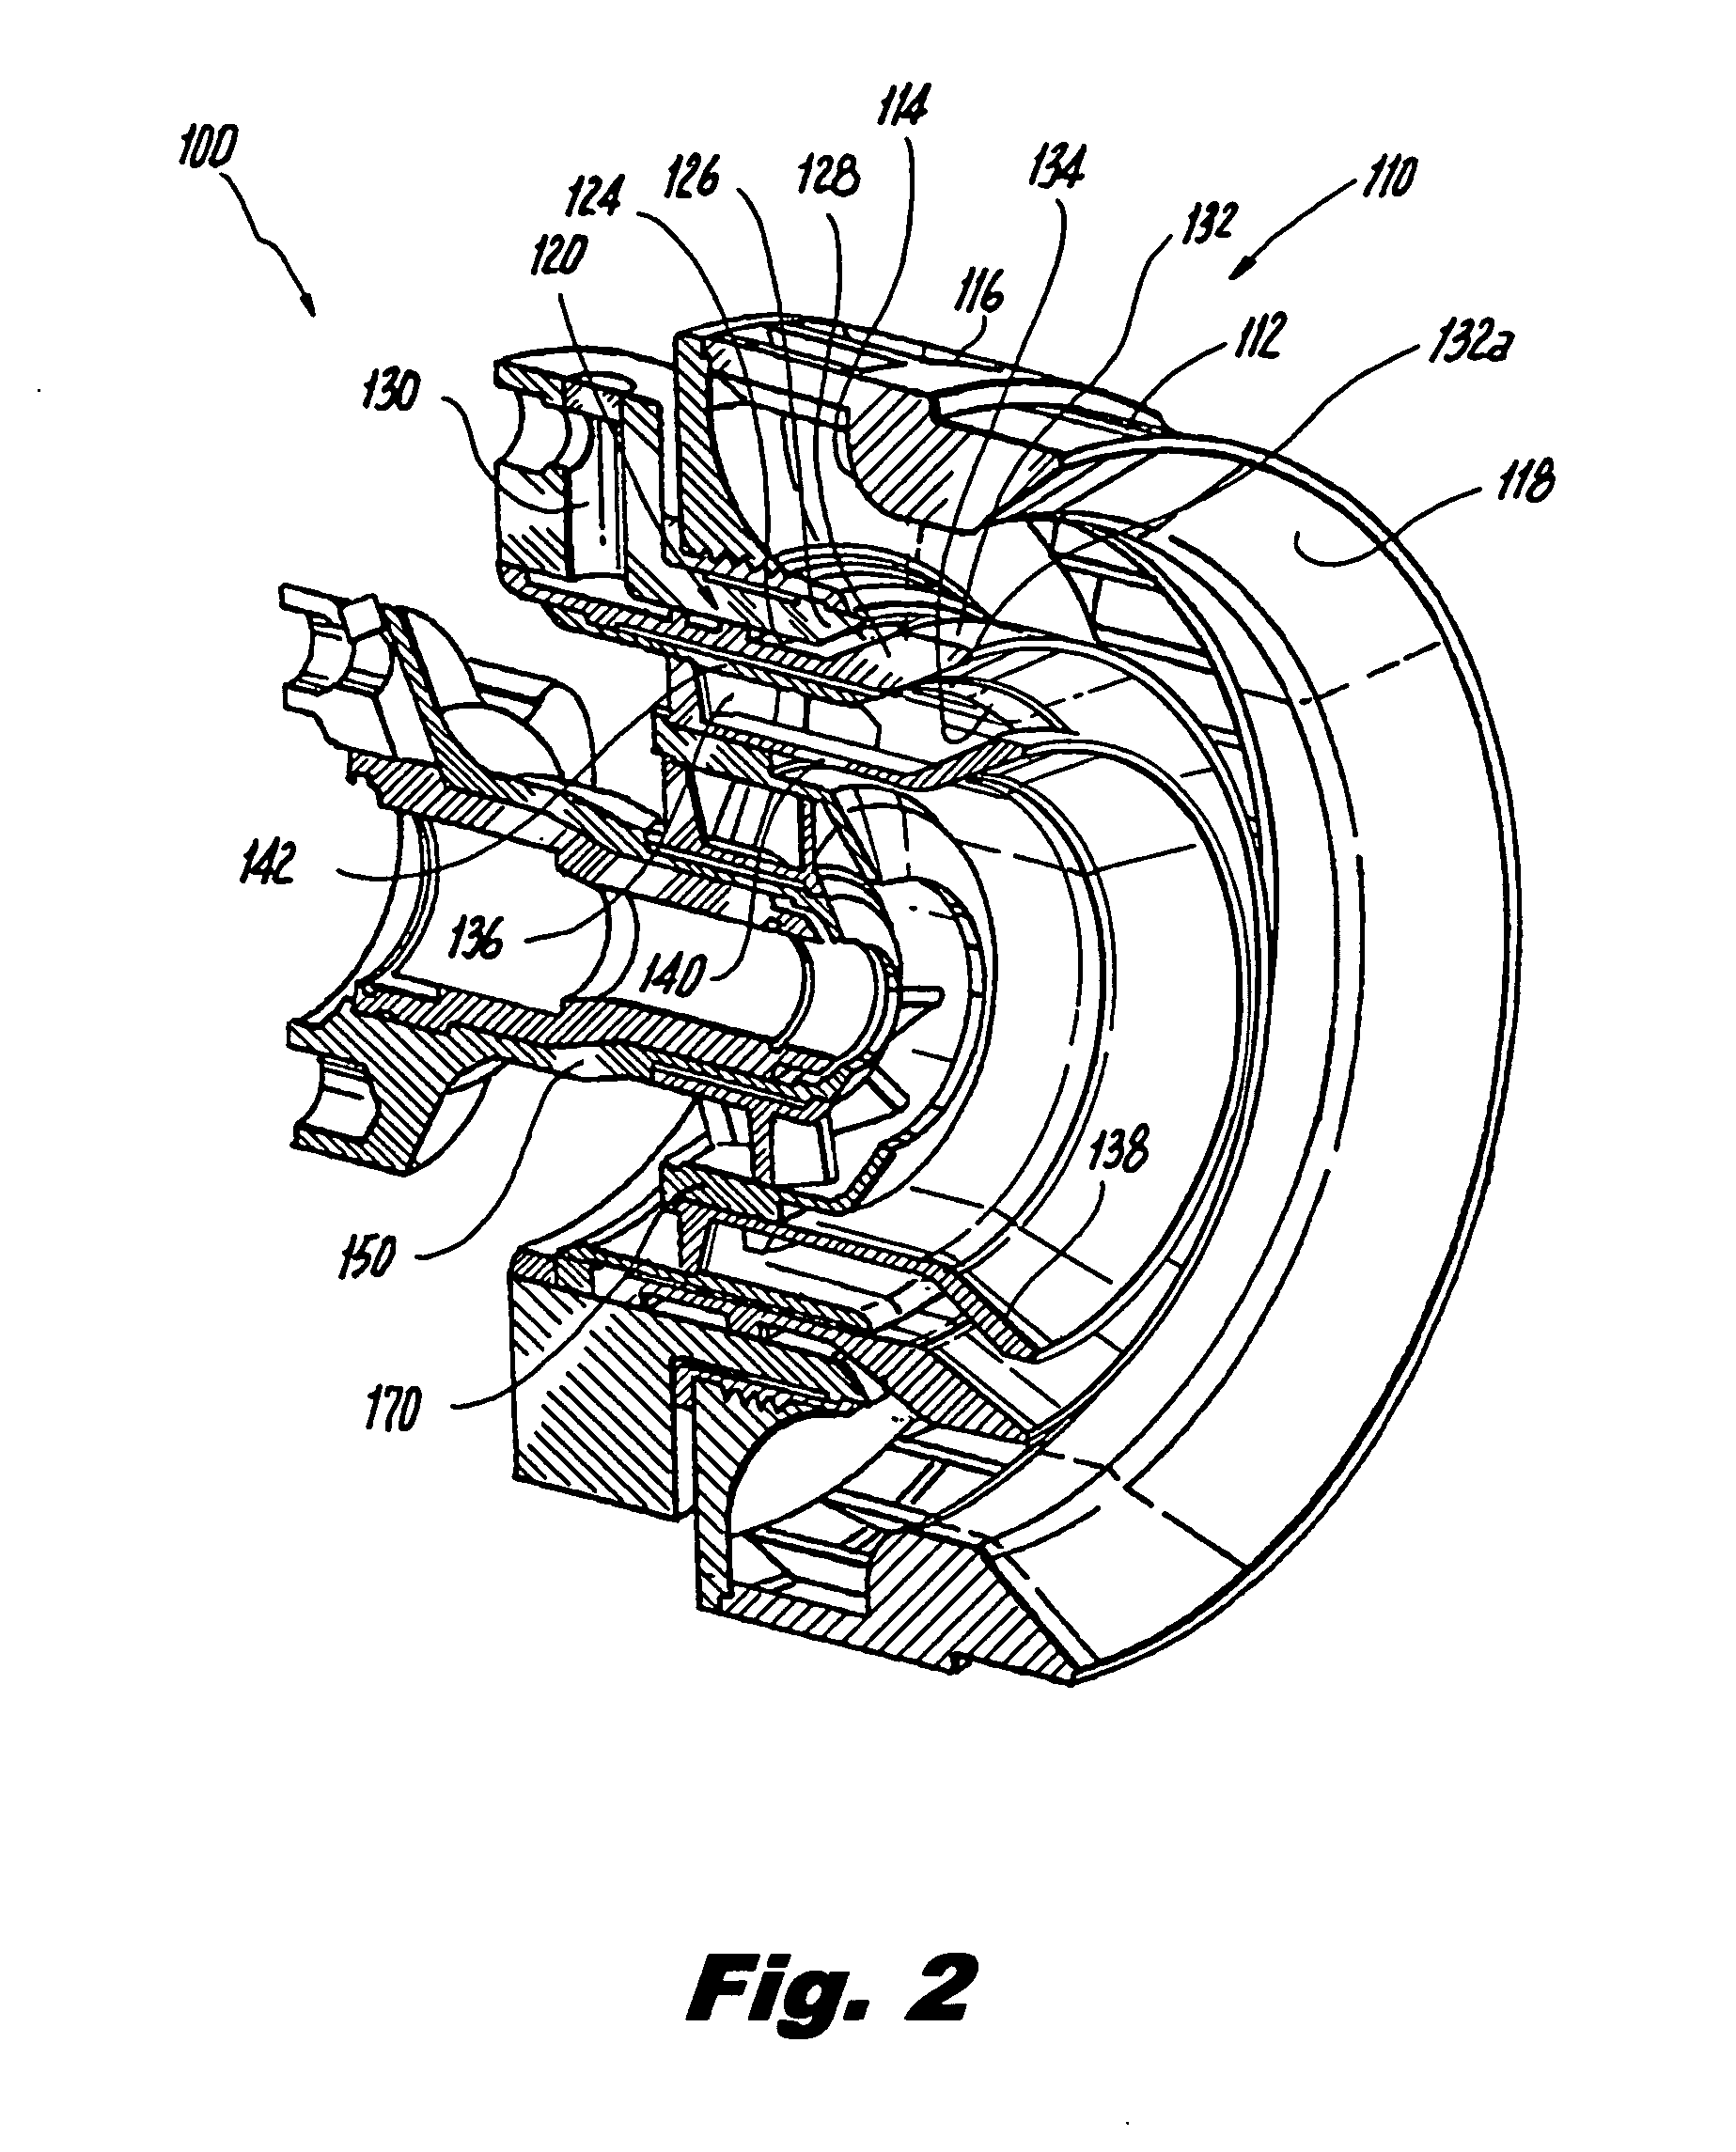 Radially outward flowing air-blast fuel injector for gas turbine engine